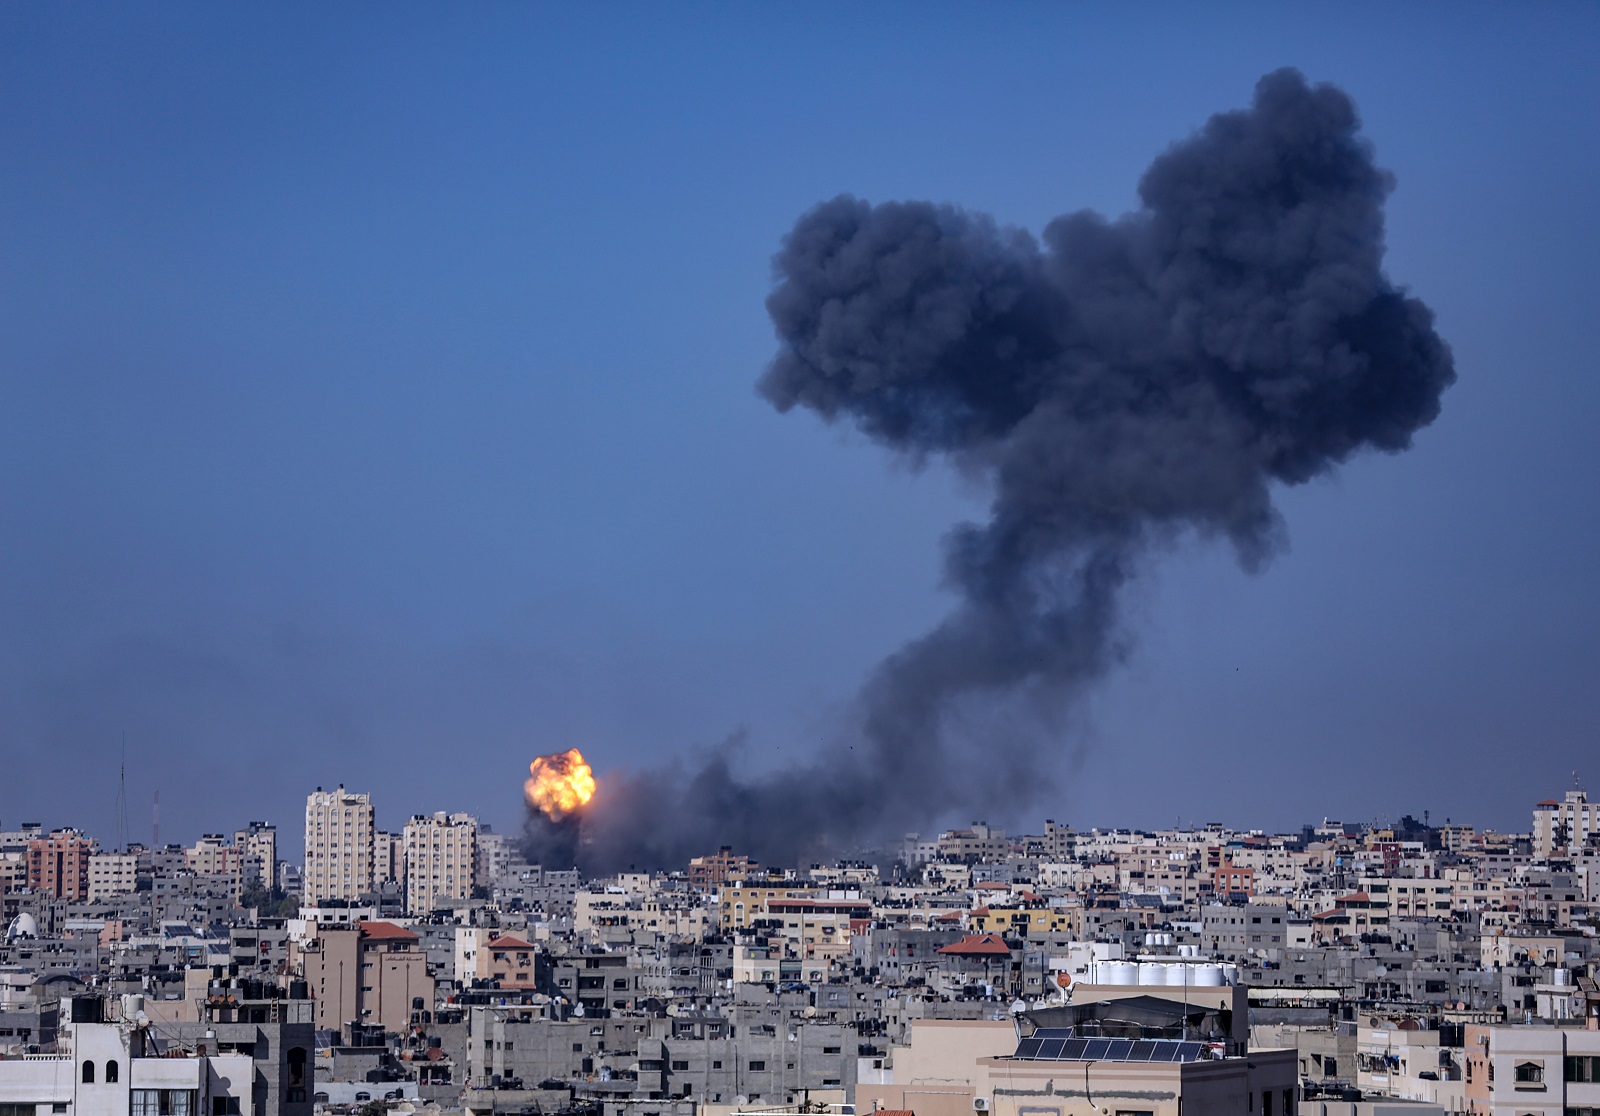 epa09193874 Smoke and flames seen rising up after an Israeli airstrike in the northern Gaza strip, 12 May 2021. At least 40 people were killed in Gaza and five in Israel as tensions have escalated in the region, leading to the heaviest offensive between Israelis and Palestinians in years. The retaliatory airstrike was launched after over 130 rockets were fired by Hamas on Israeli cities amid ongoing clashes.  EPA/HAITHAM IMAD